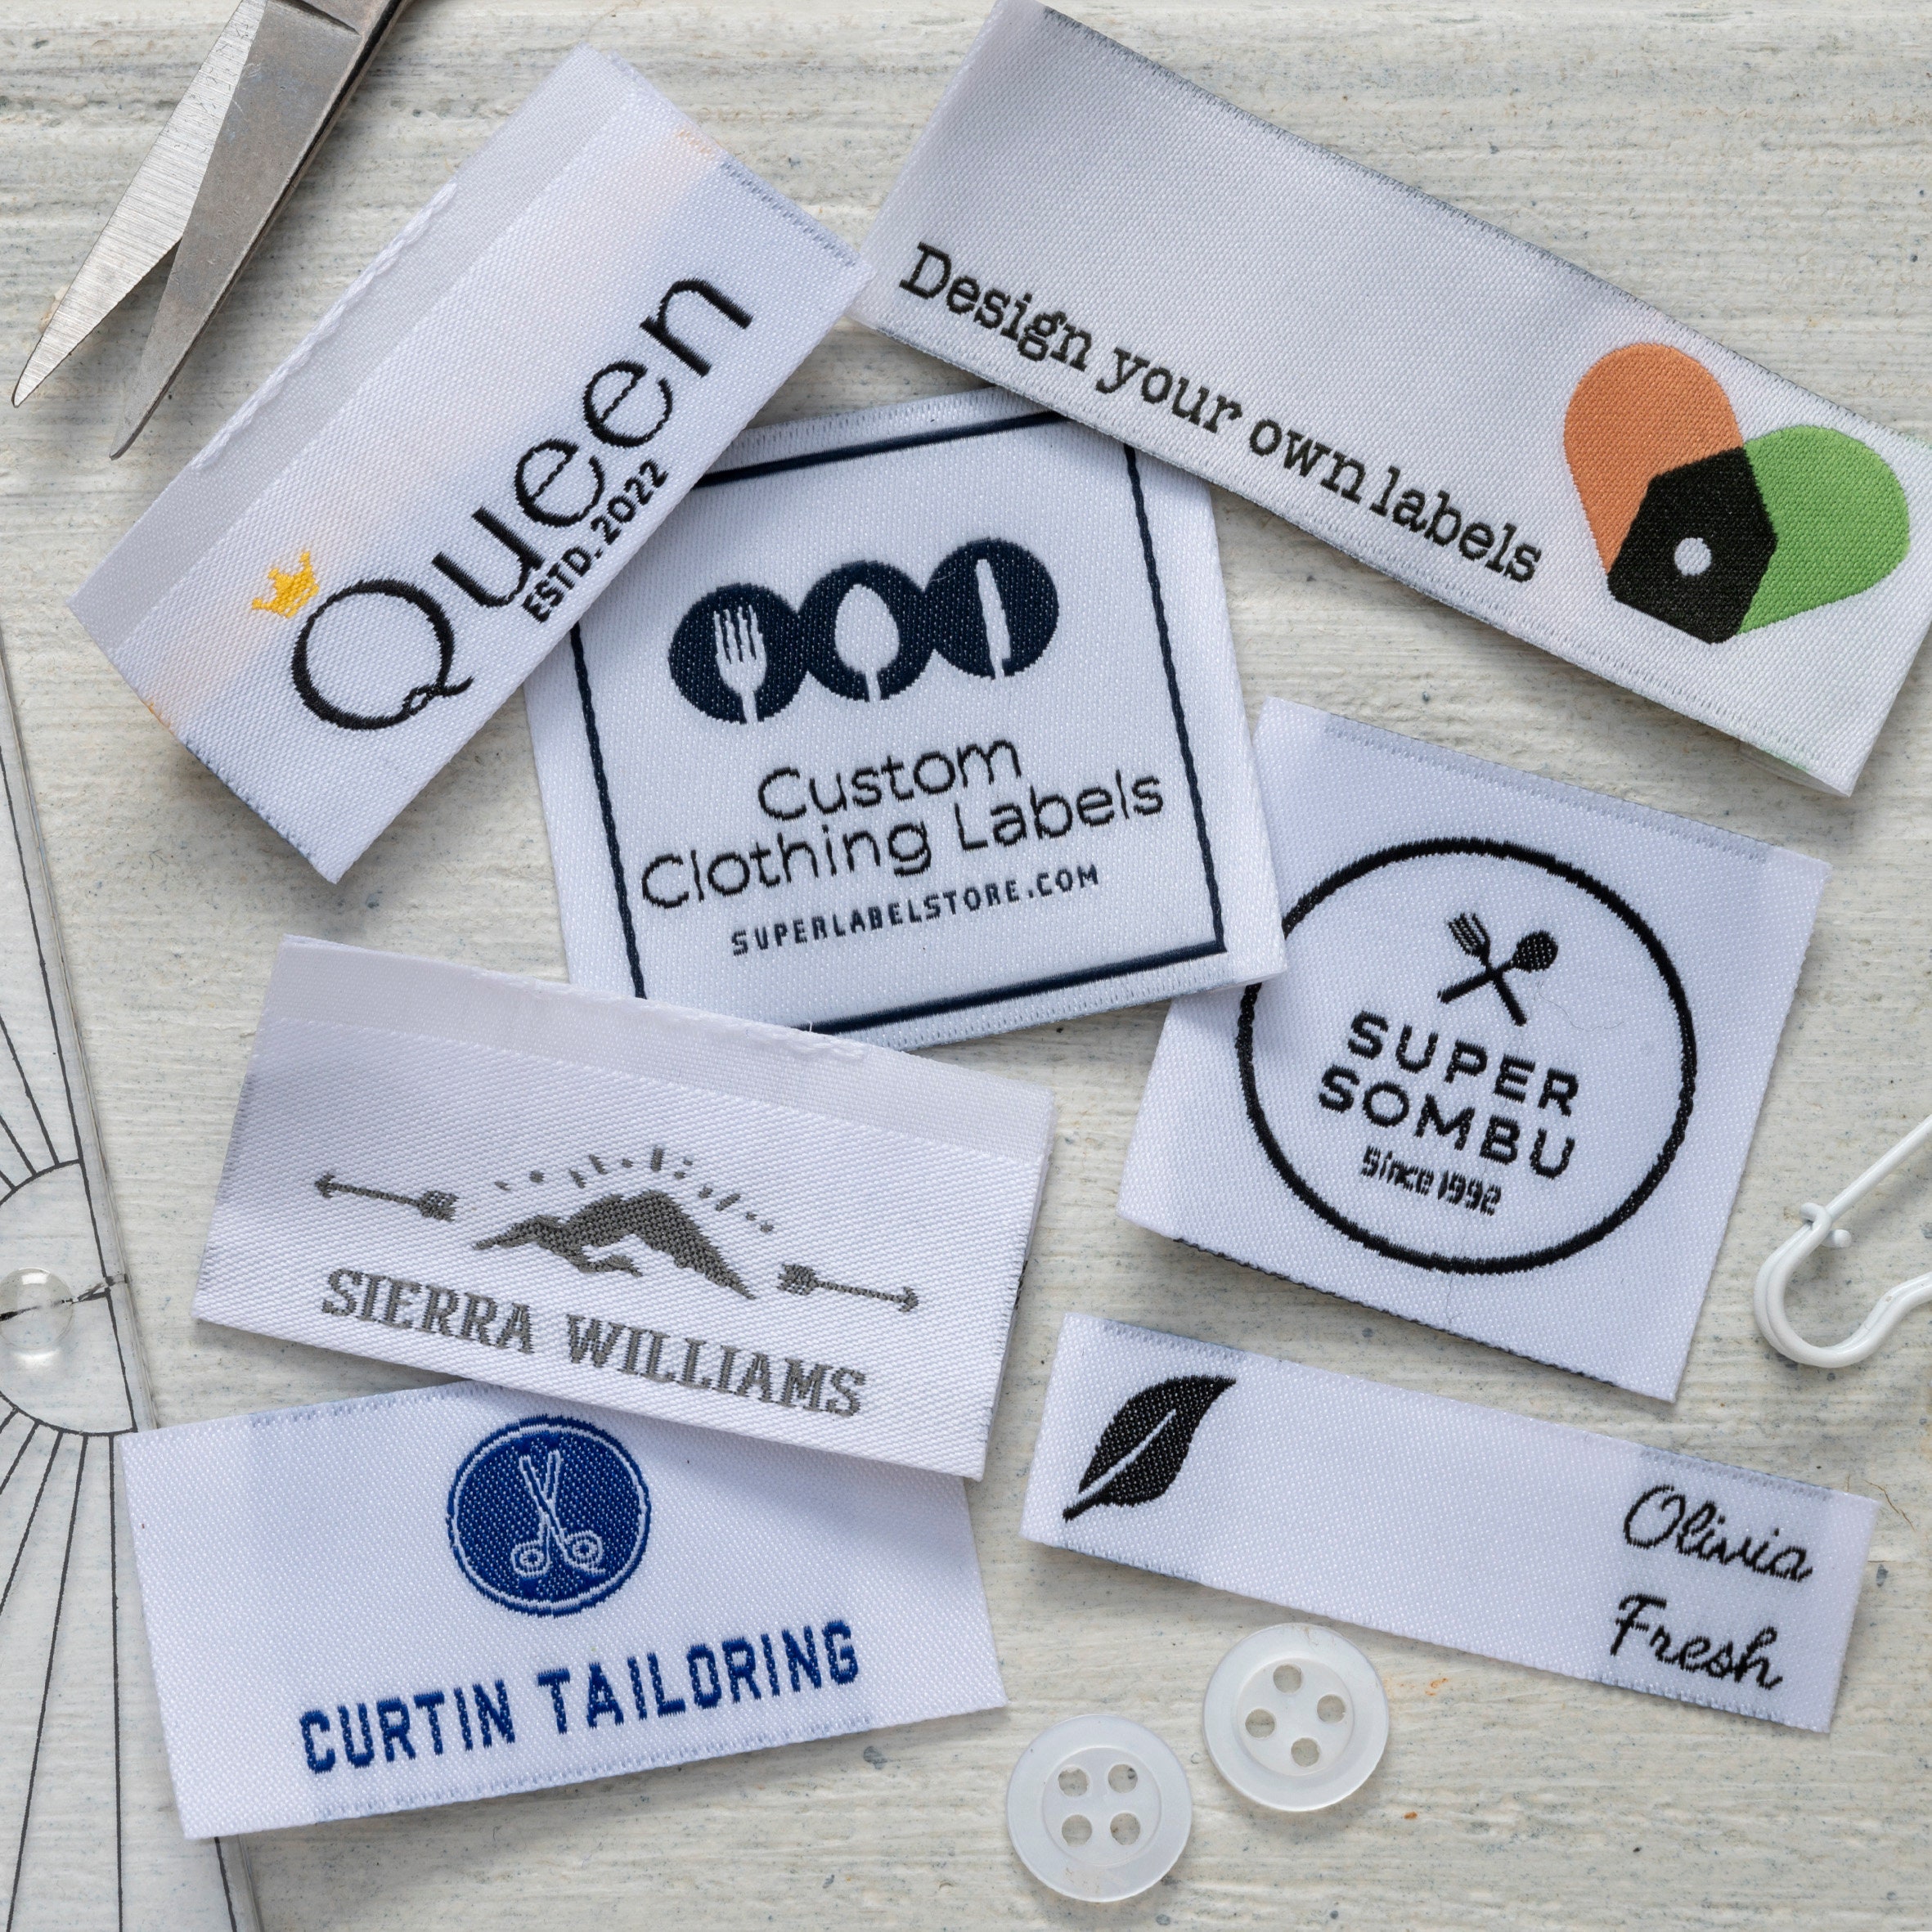 Random Woven Clothing Labels Tags For Clothes,customized Garment